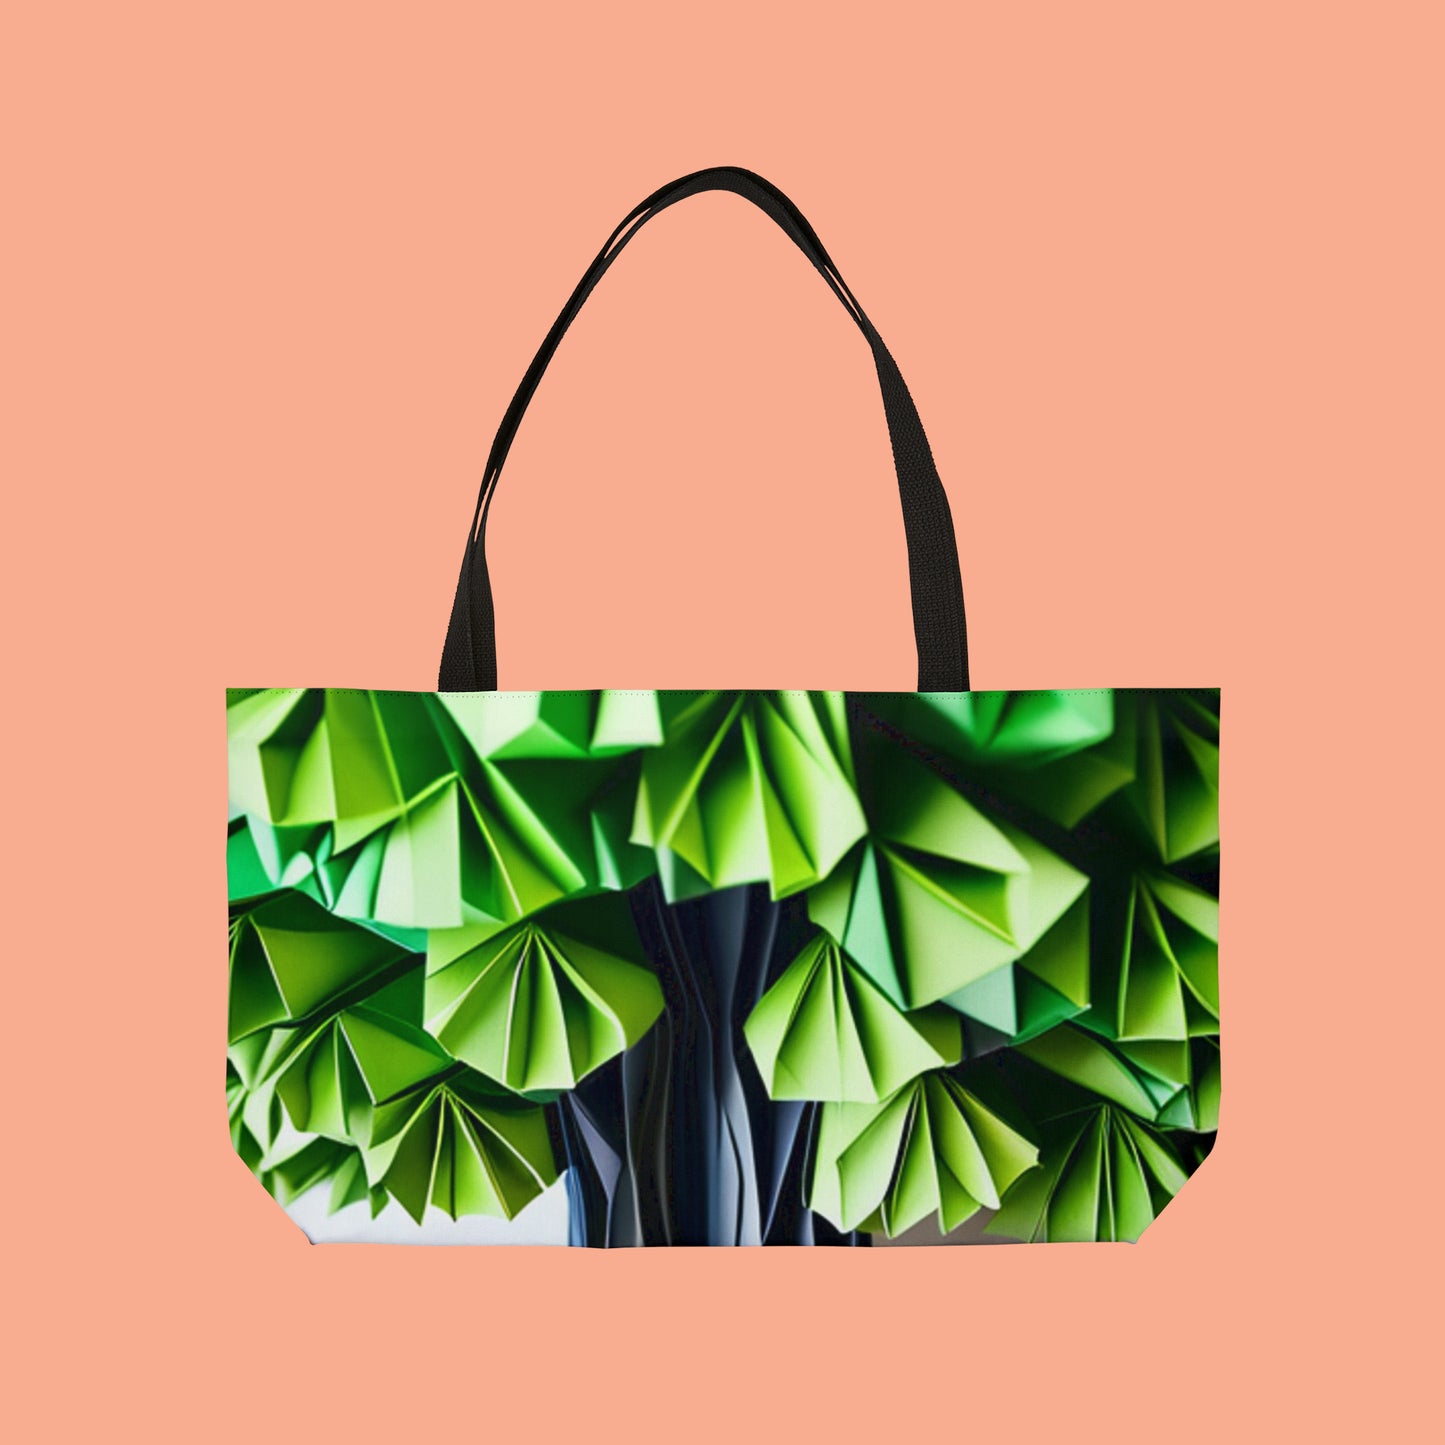 Great banyan tree in origami style inspired design on this beautiful Weekender Tote Bag.